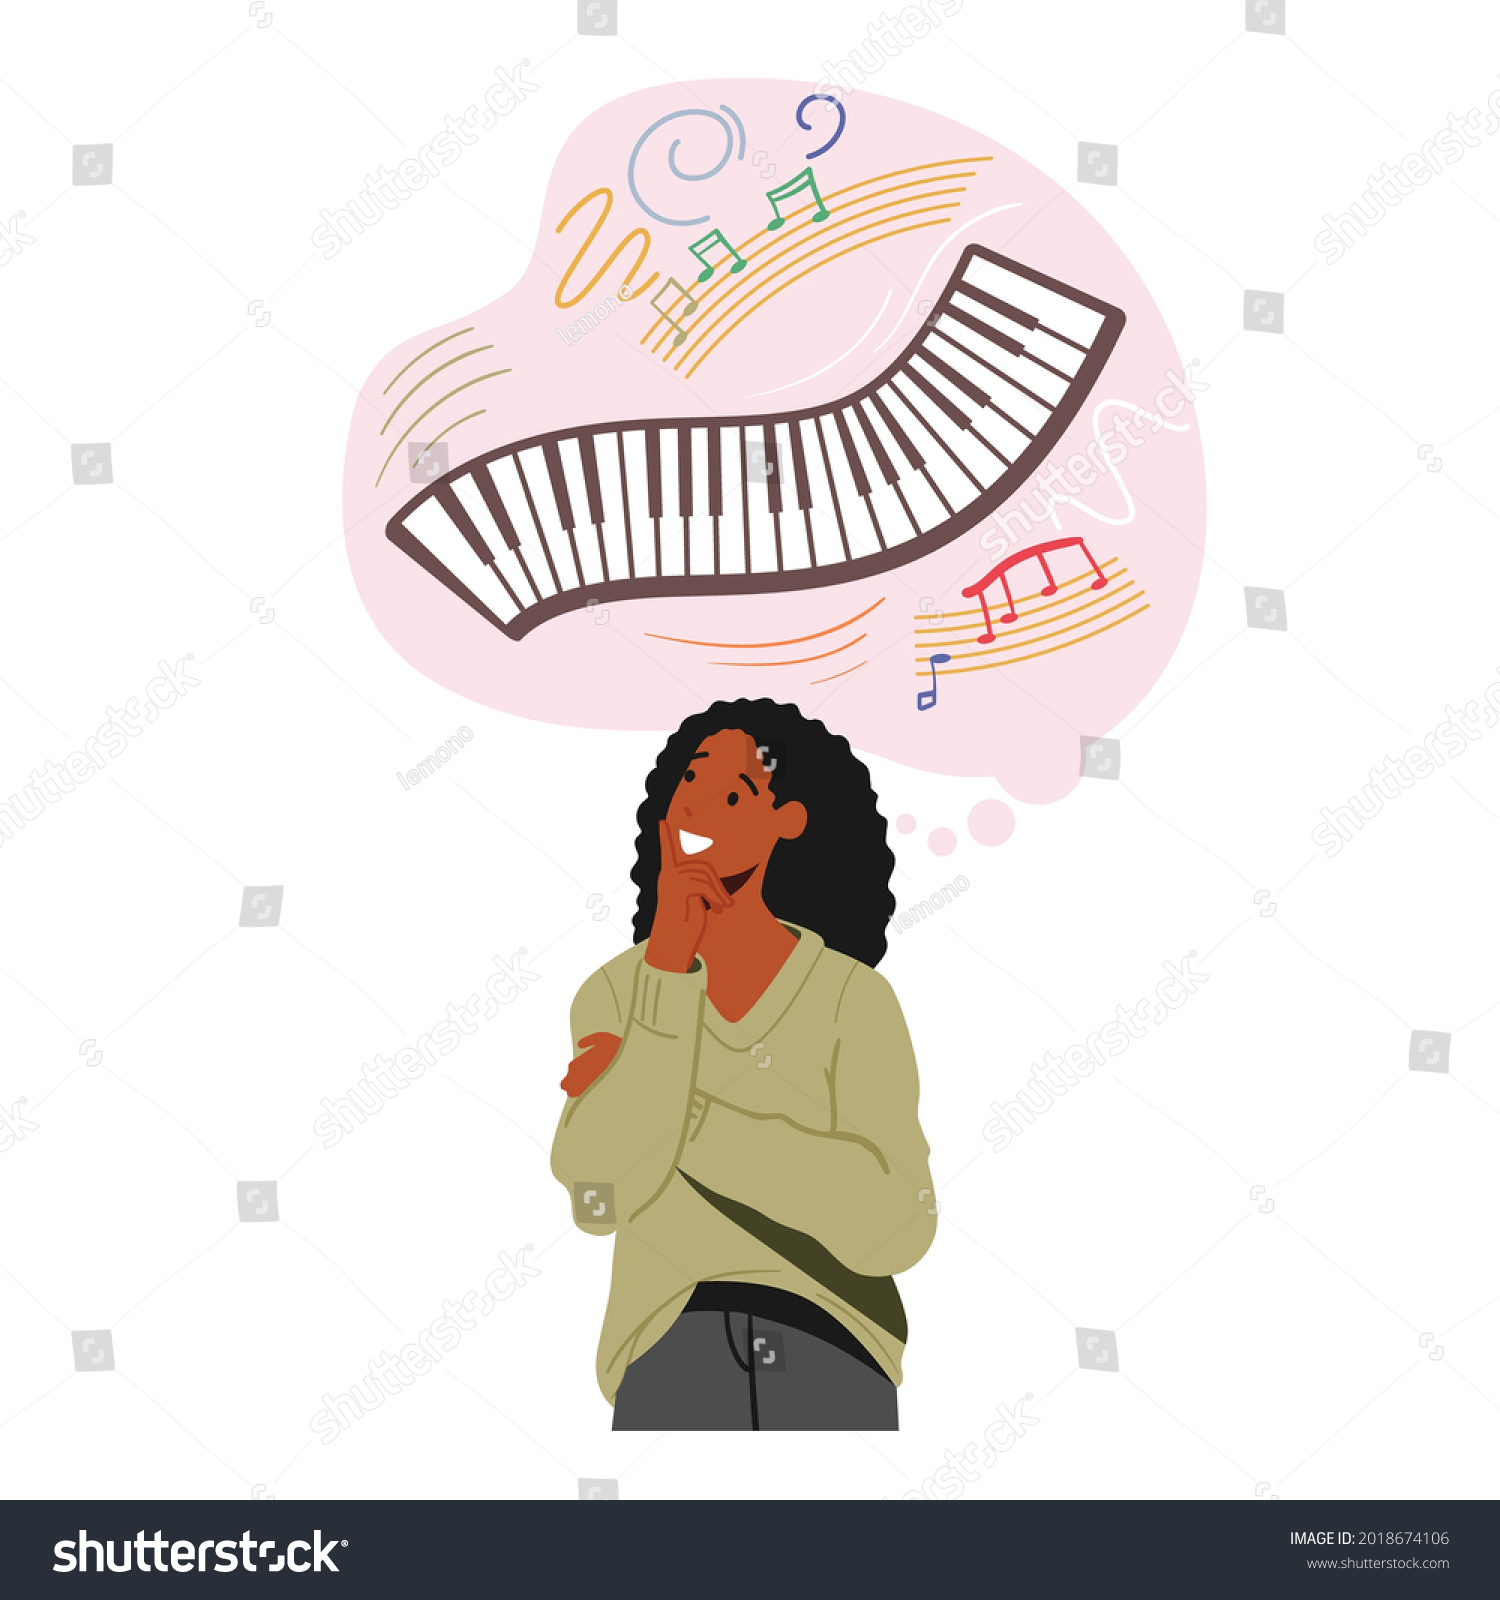 SVG of Woman with Musical Thinking, Artistic Mindset Type. Talented Person with Creative Mentality Create Musical Composition in her Mind. Talented Musician Girl Inspiration. Cartoon Vector Illustration svg